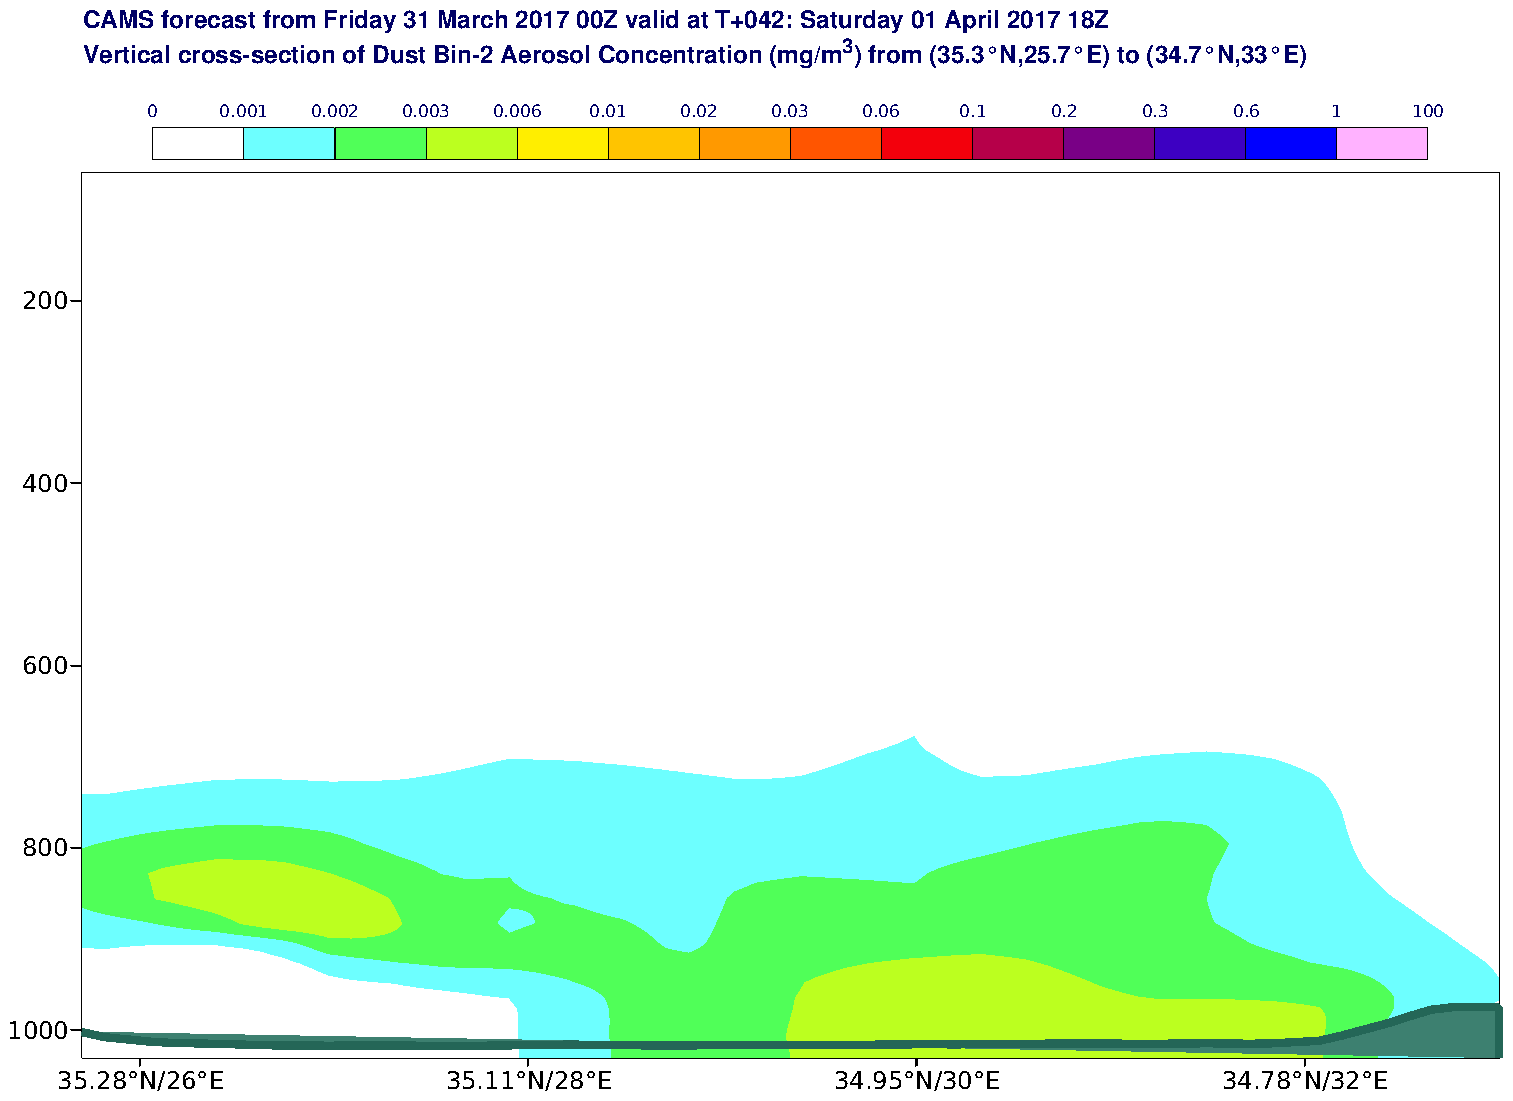 Vertical cross-section of Dust Bin-2 Aerosol Concentration (mg/m3) valid at T42 - 2017-04-01 18:00